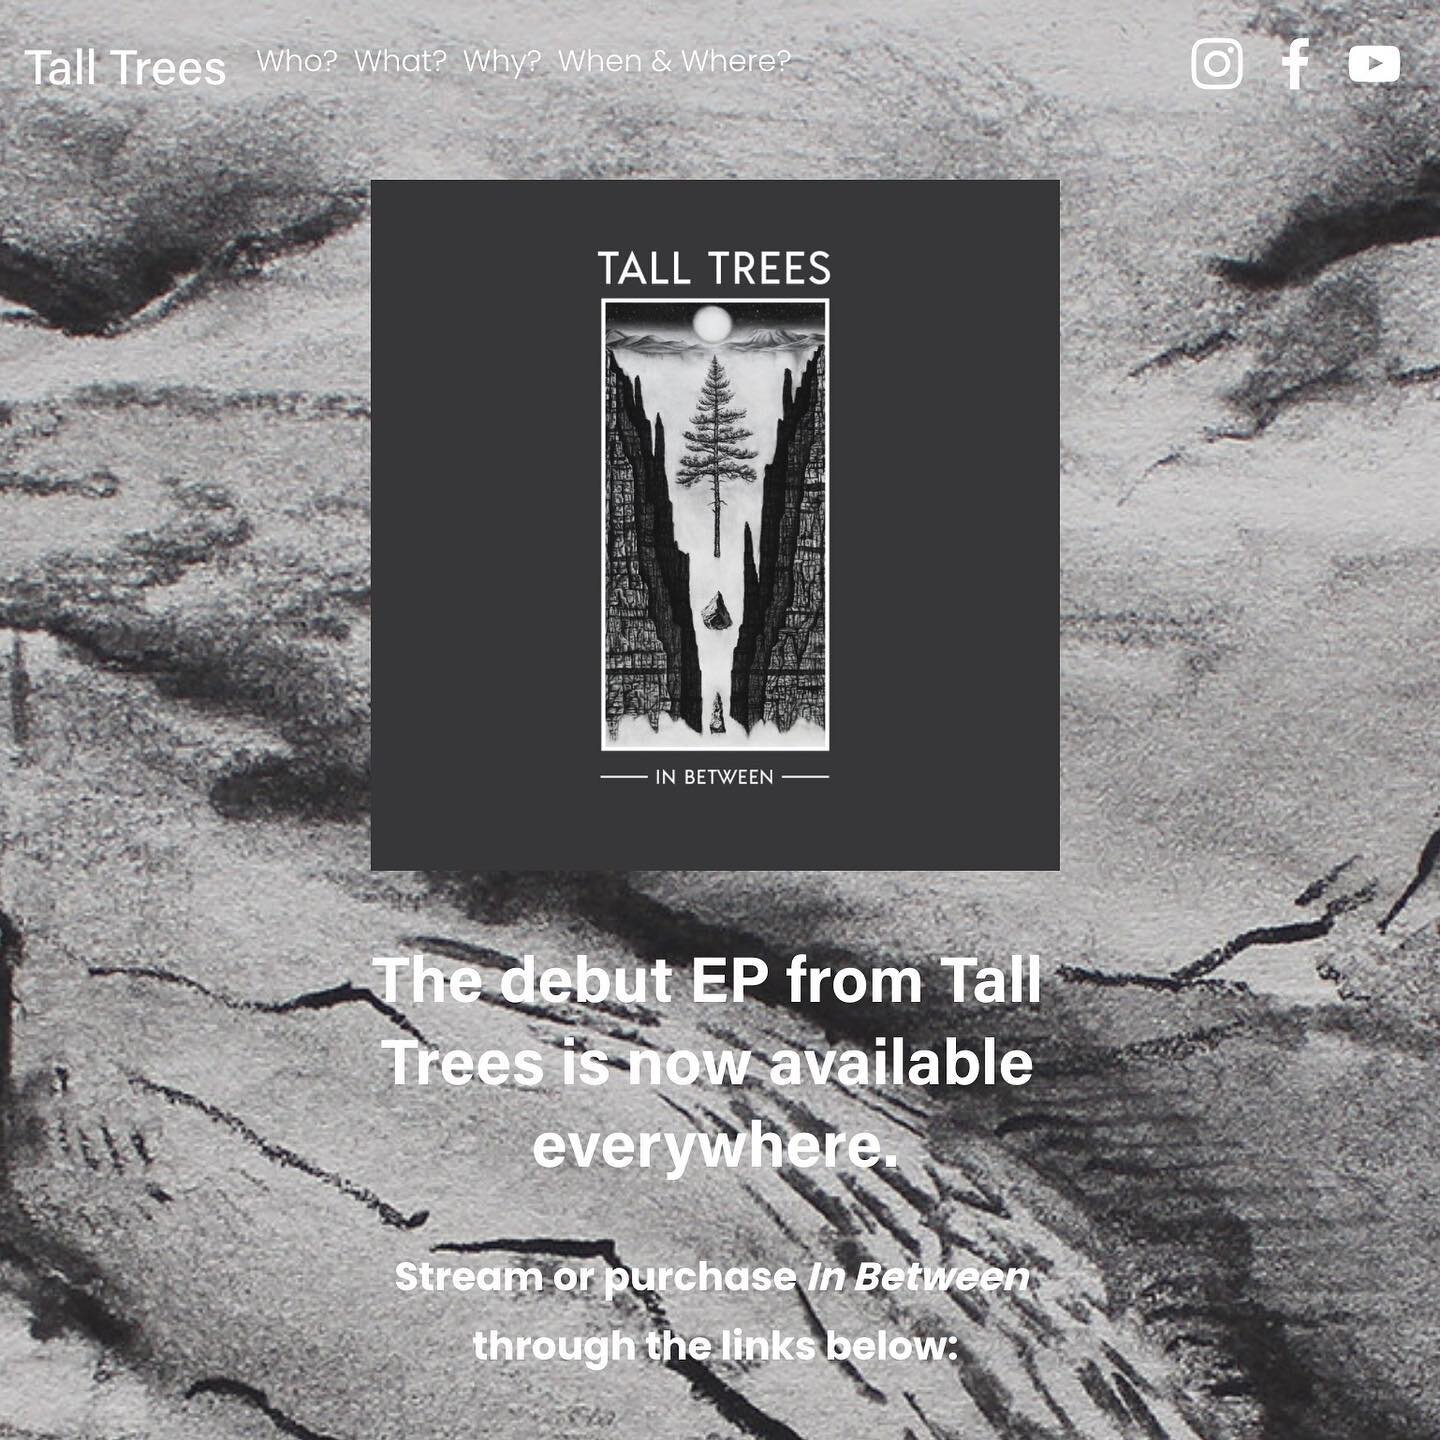 The Tall Trees website is updated - link in bio! Don&rsquo;t have Spotify? You can now stream our songs directly from our website, fo free! Plus, we&rsquo;ve posted all the lyrics to each song so you can sing along 🎤🕺⁣
⁣
Head to www.TallTrees.me to